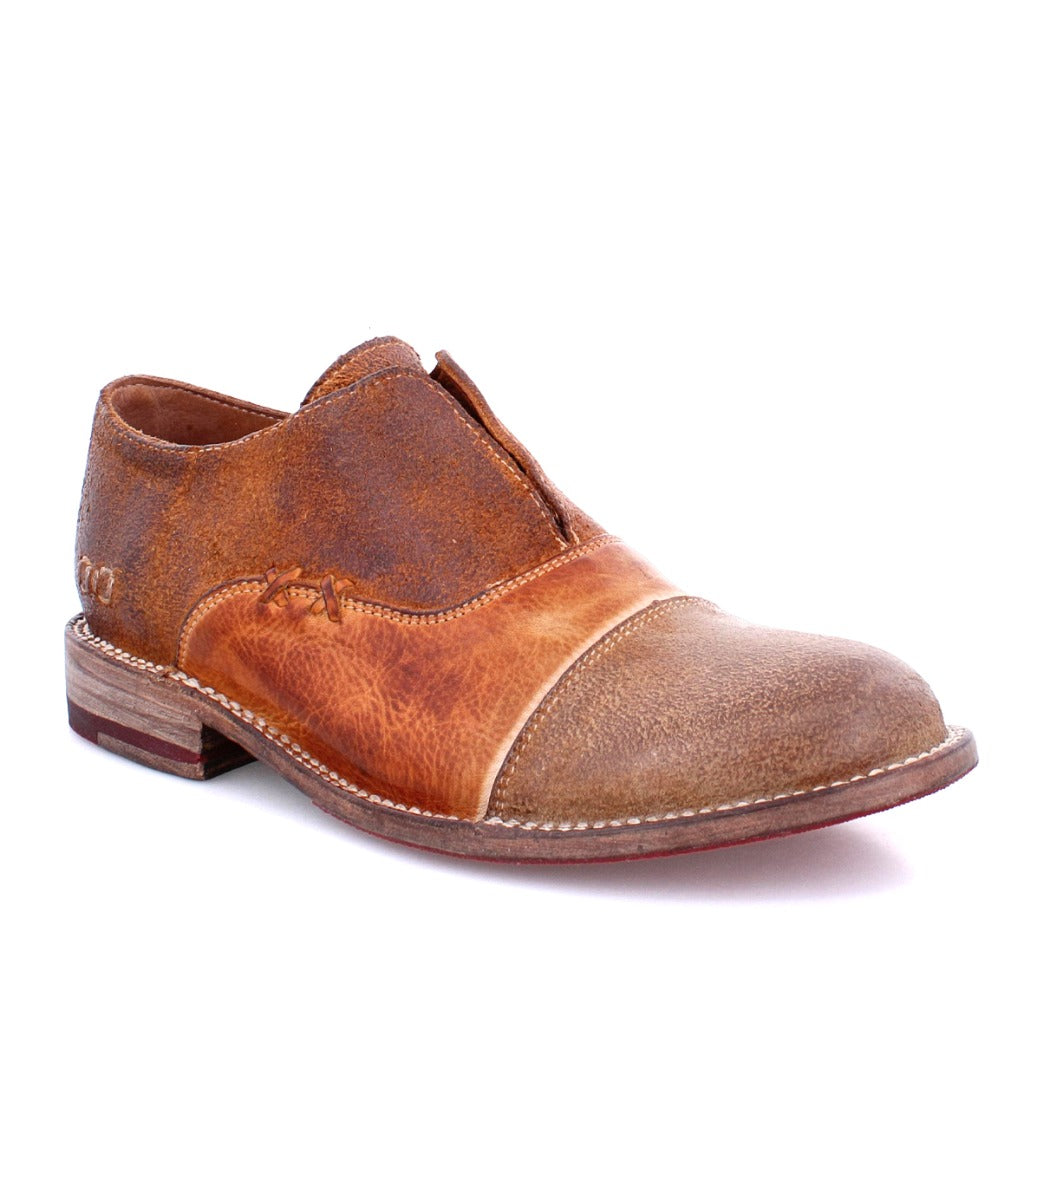 A men's Garden M oxford shoe by Bed Stu, in brown and tan.